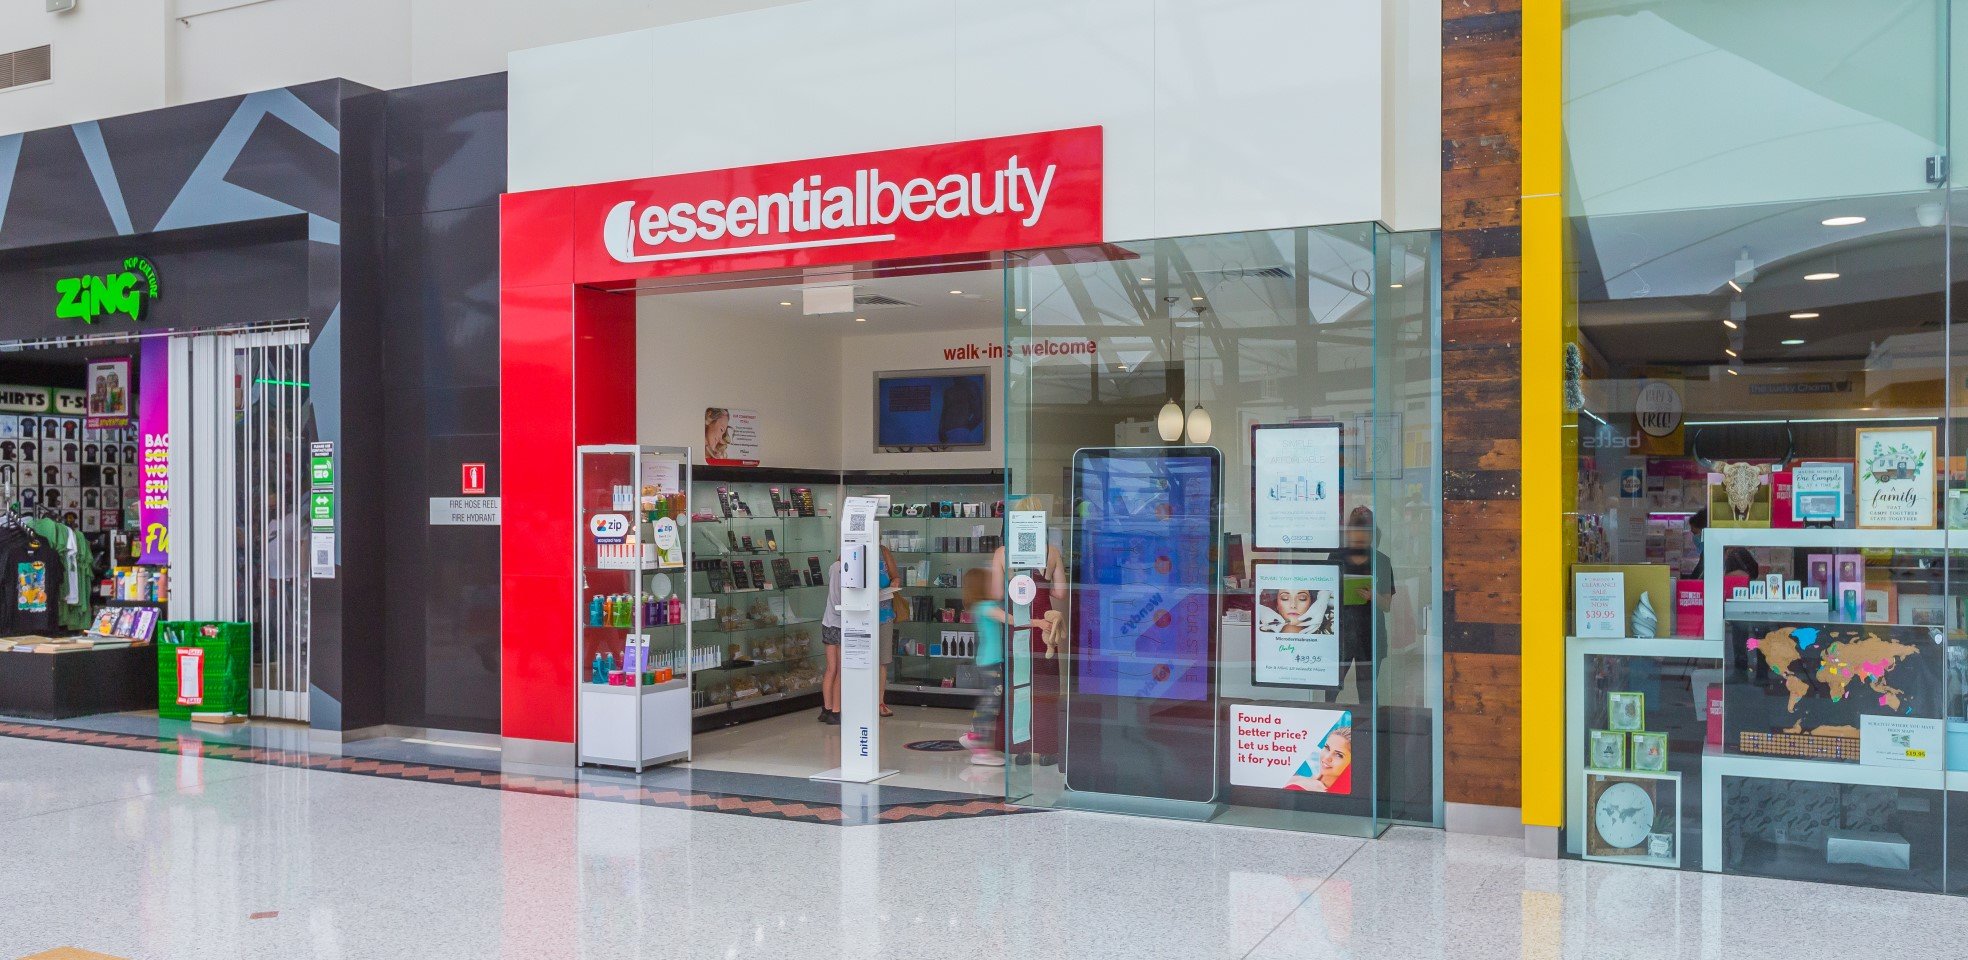 Essential Beauty